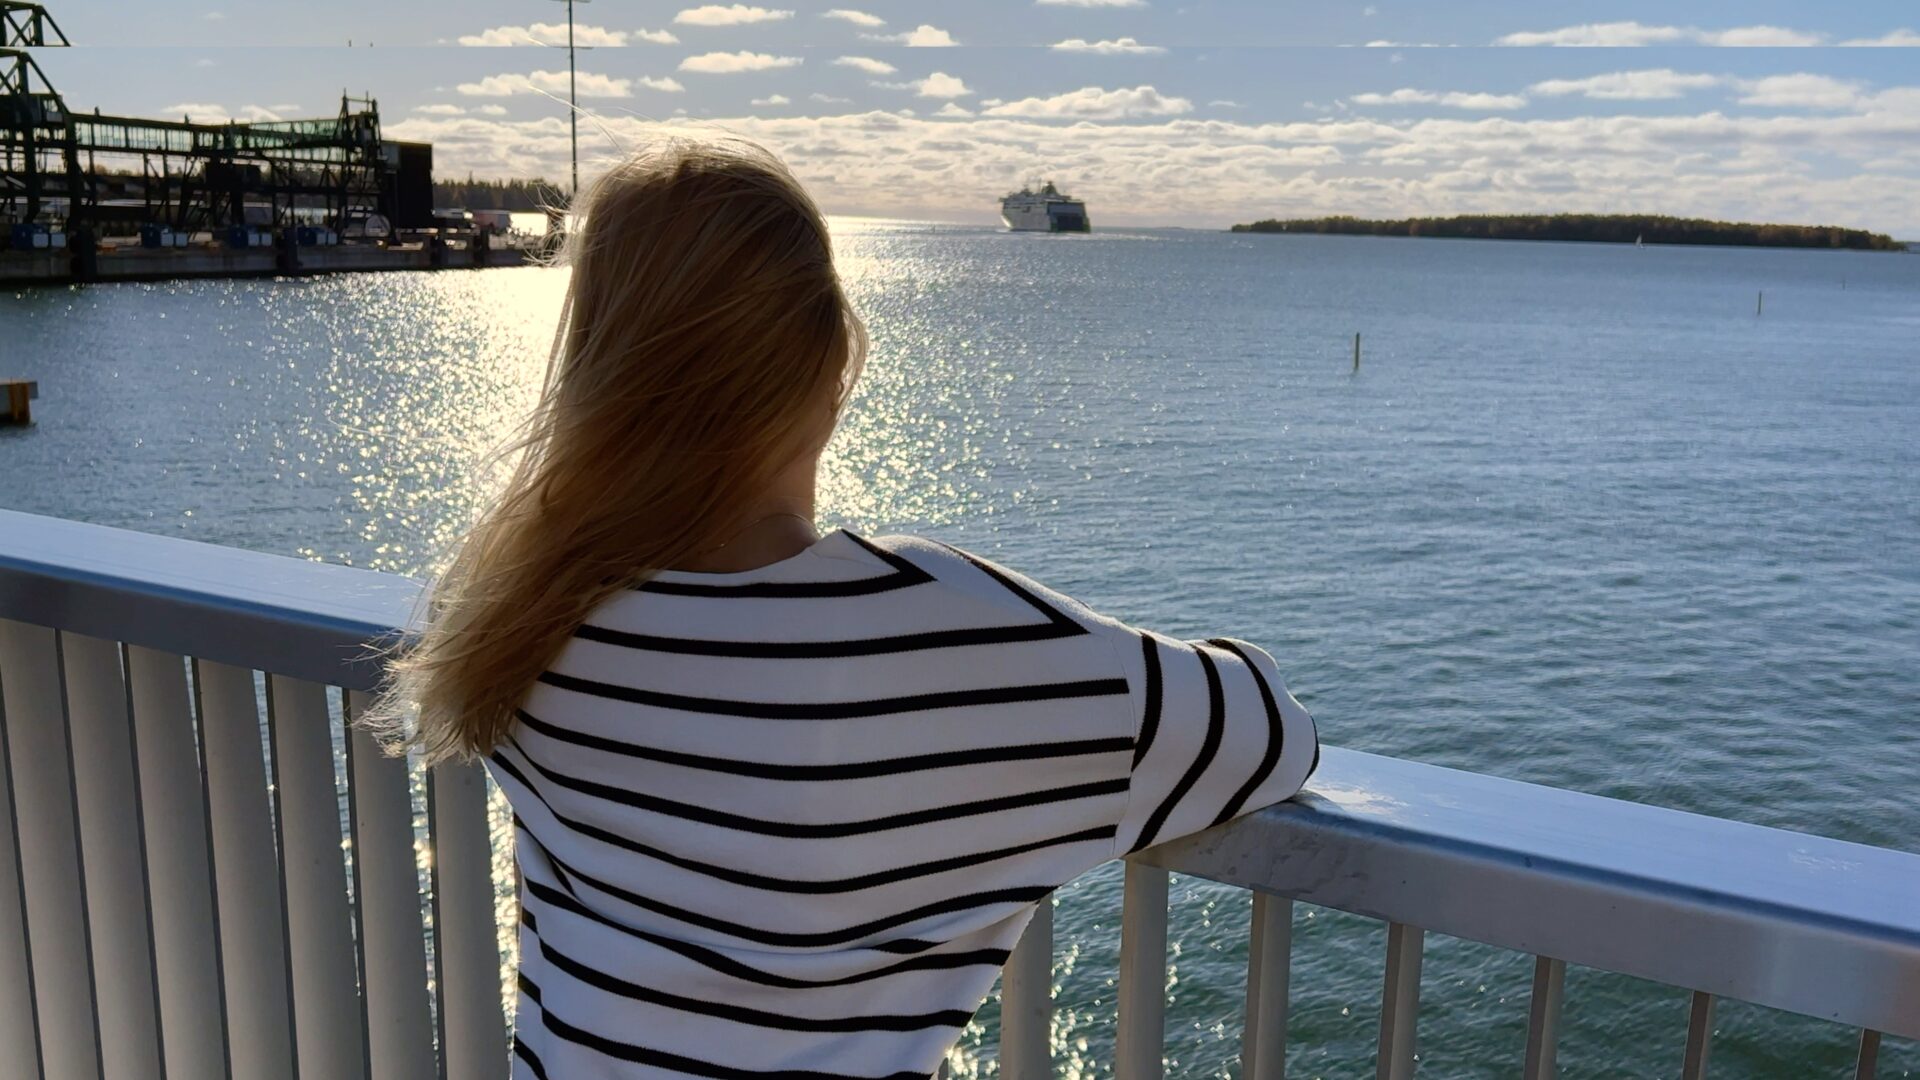 A young woman looks at sea.